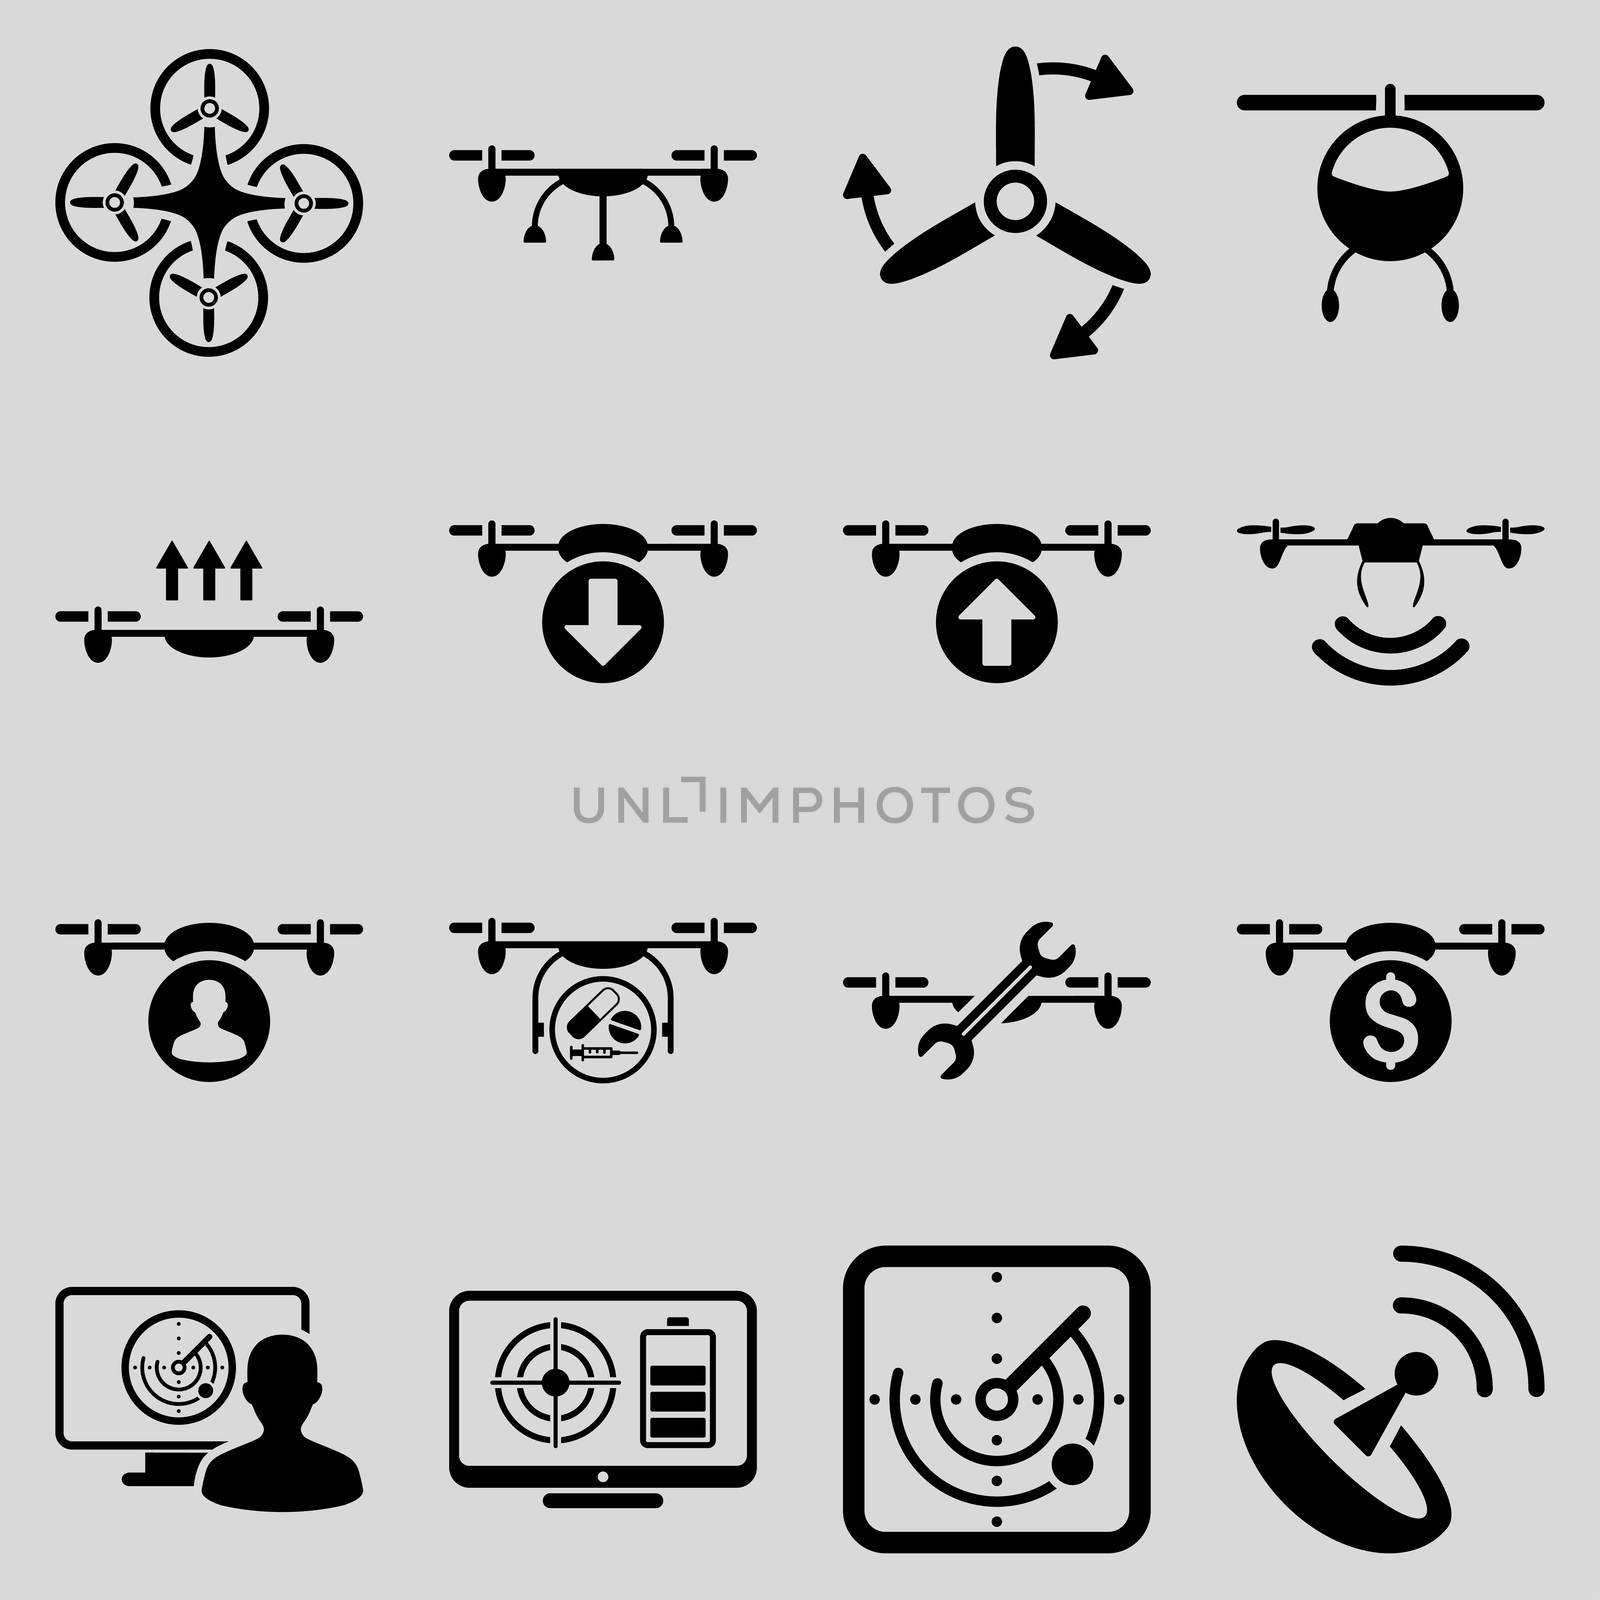 Quadcopter service icon set designed with black color. These flat pictograms are isolated on a light gray background.